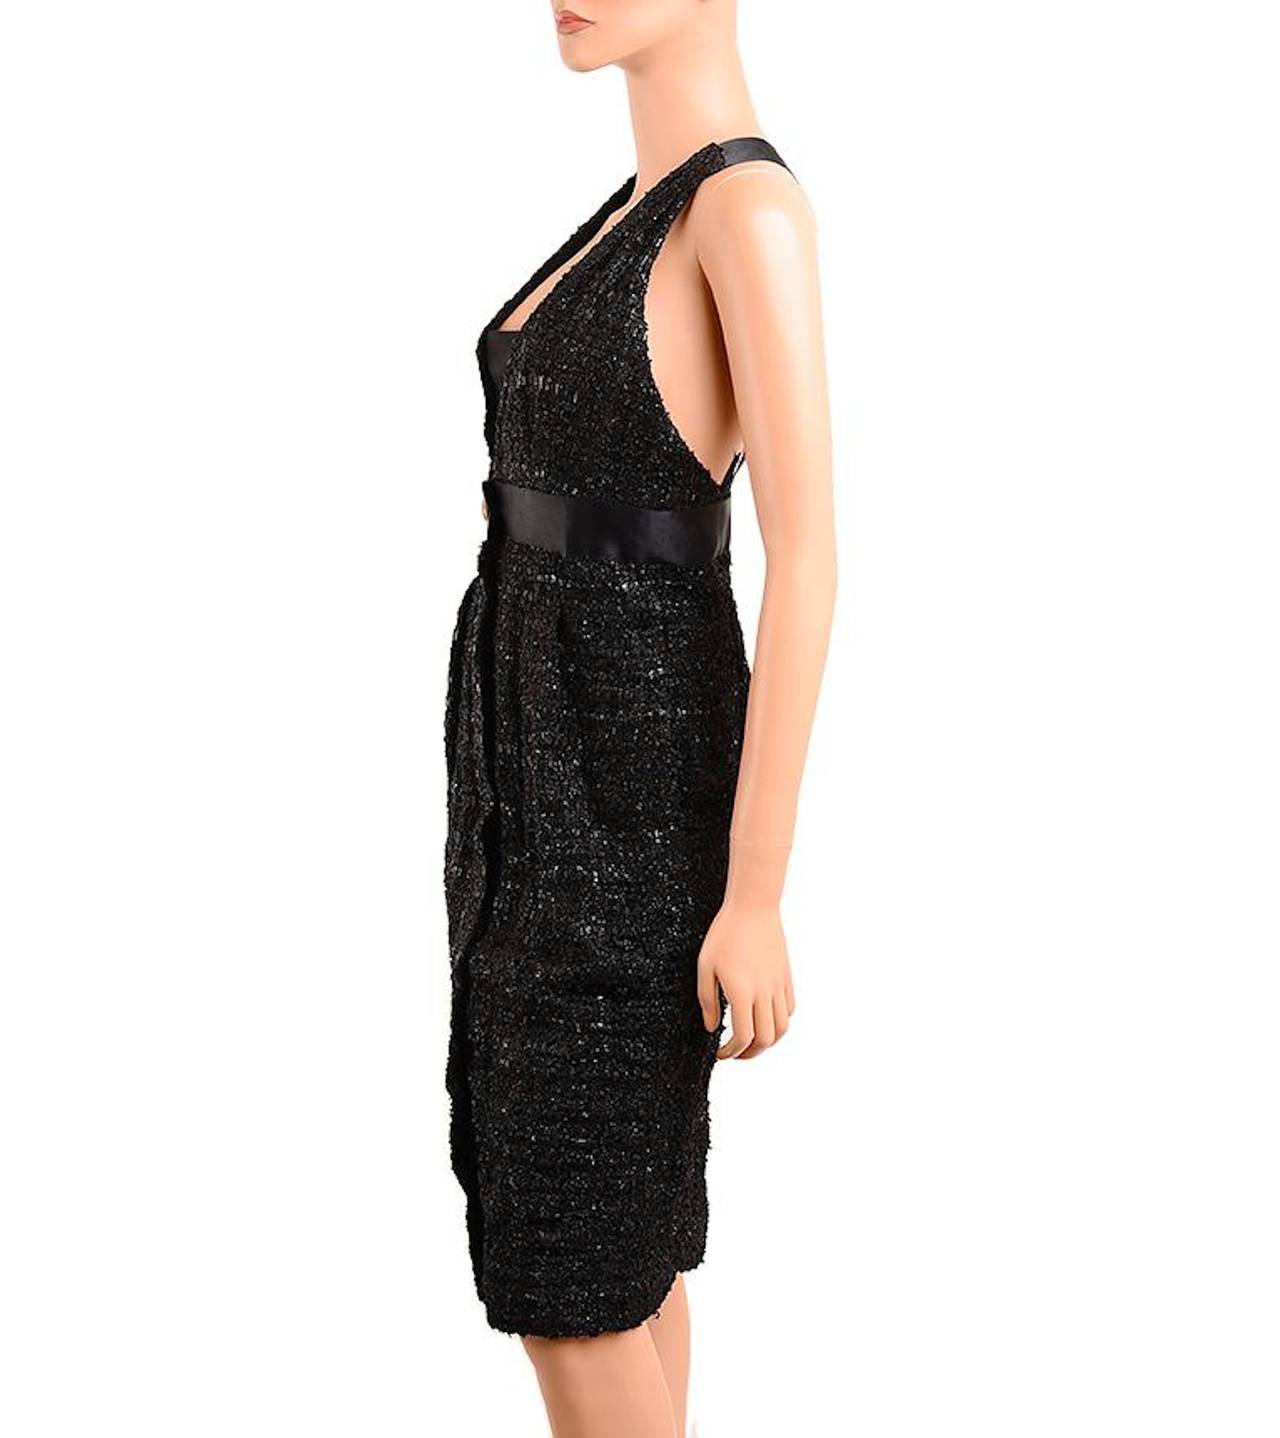 Chanel black lurex fantasy tweed boucle dress with black silk trim, deep v front with removable snap-on center panel, empire banded waist with black and gold Chanel stamped button, front zipper closure behind center placket and rear criss-cross